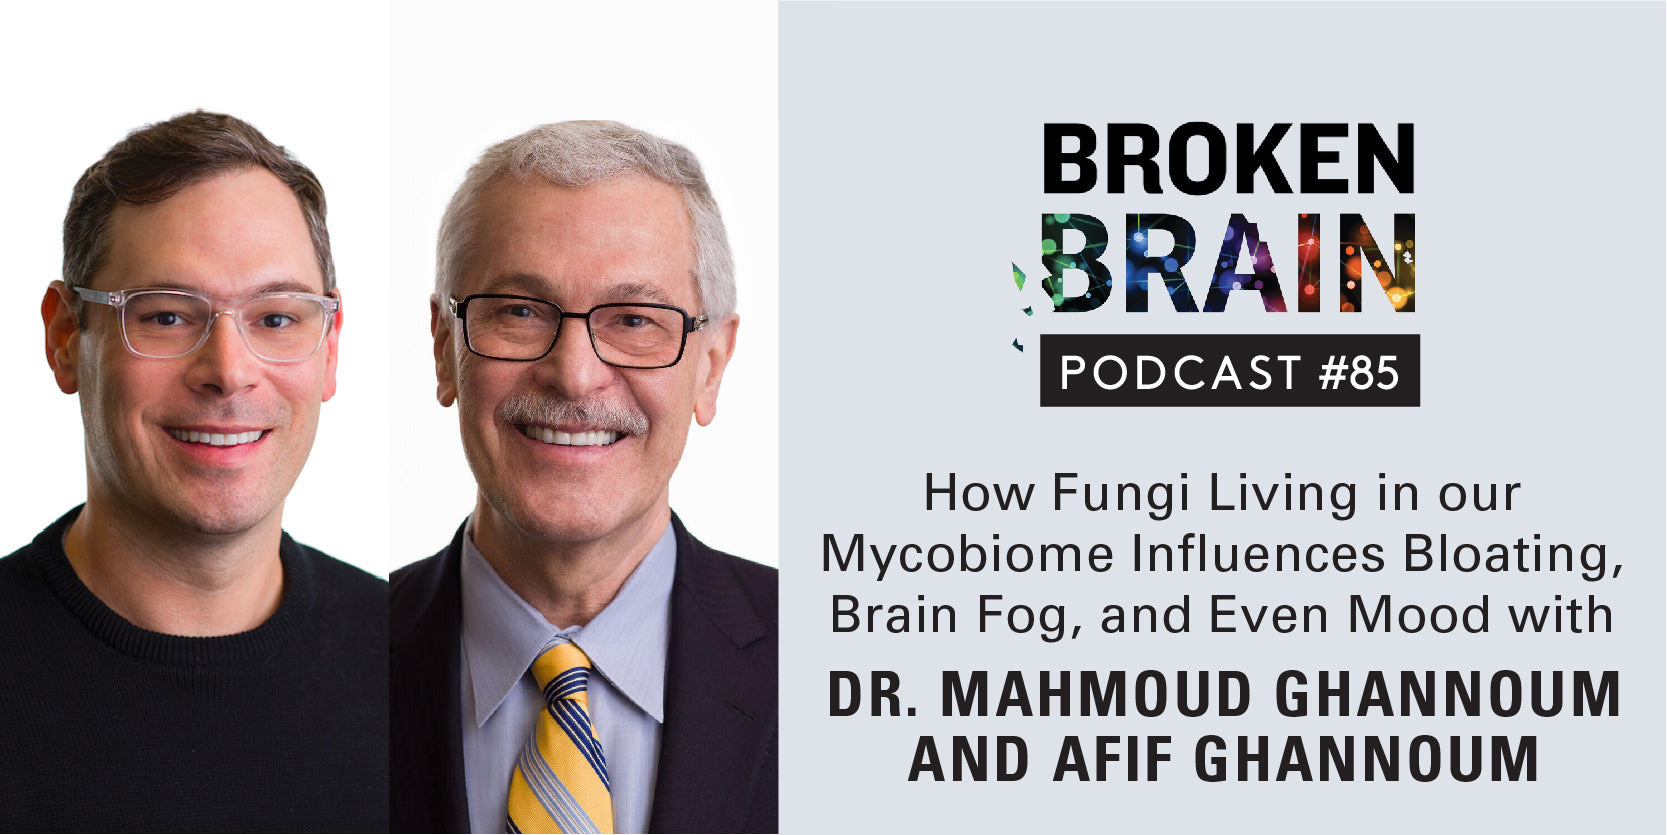 Broken Brain Podcast Episode 85: How Fungi Living in Our Mycobiome Influence Bloating, Brain Fog, and Even Mood with Dr. Mahmoud Ghannoum and Afif Ghannoum